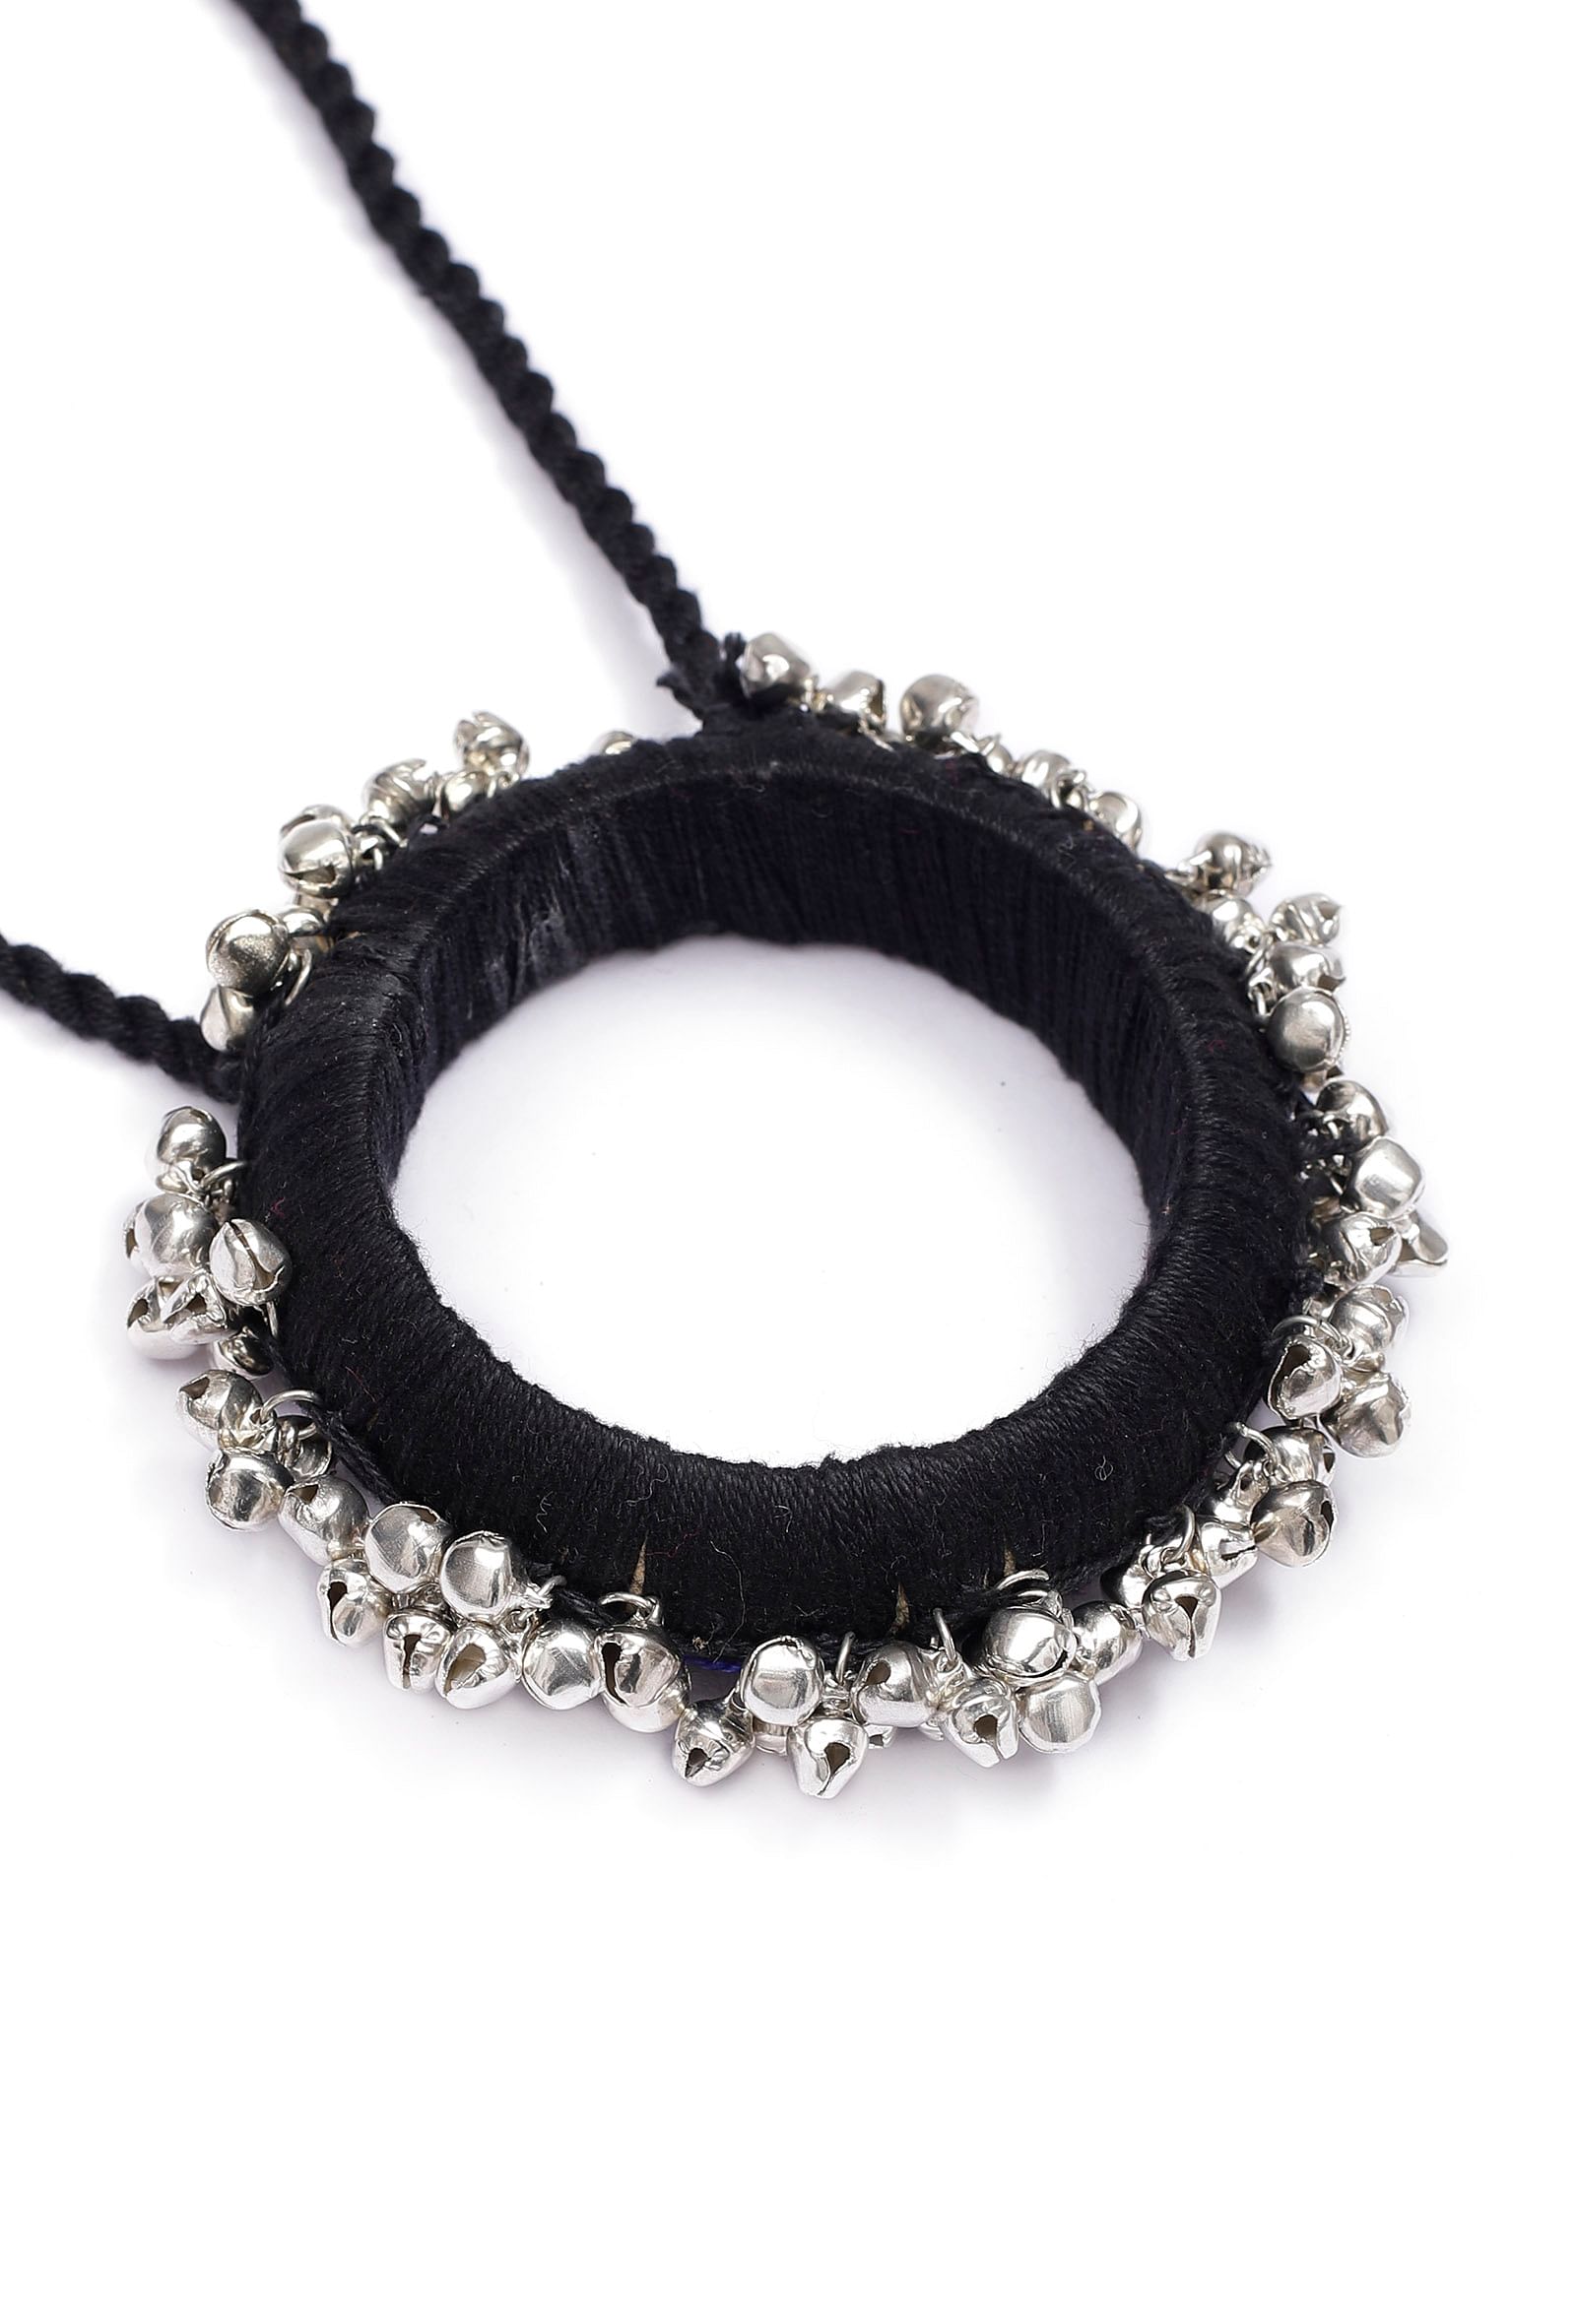 Onyx Black Ghungroo Handcrafted Necklace